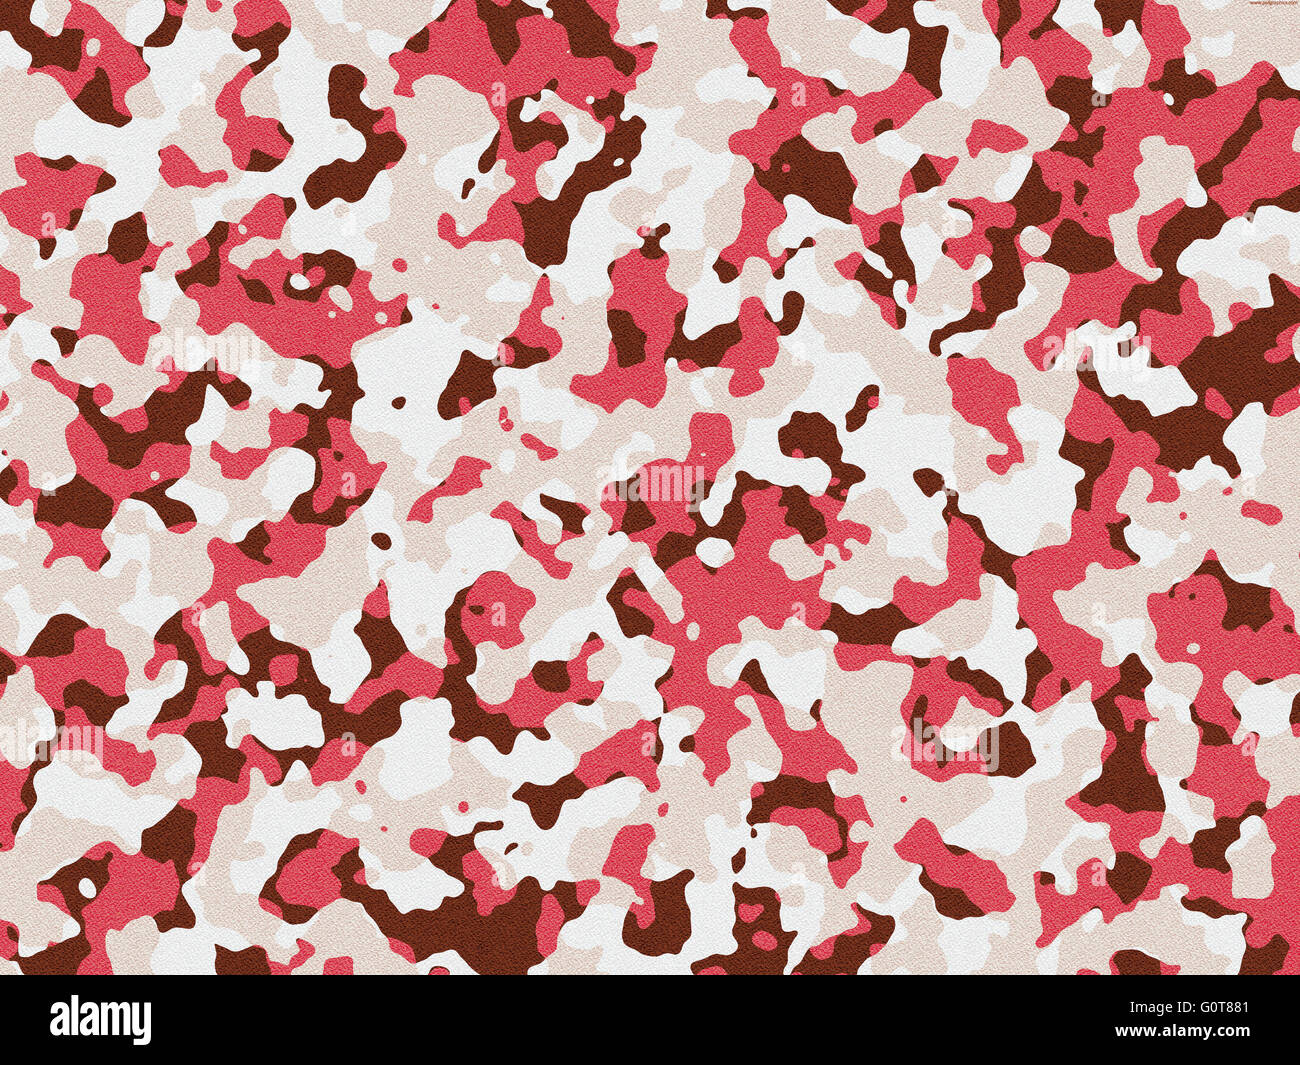 Textured red and beige camouflage pattern background Stock Photo